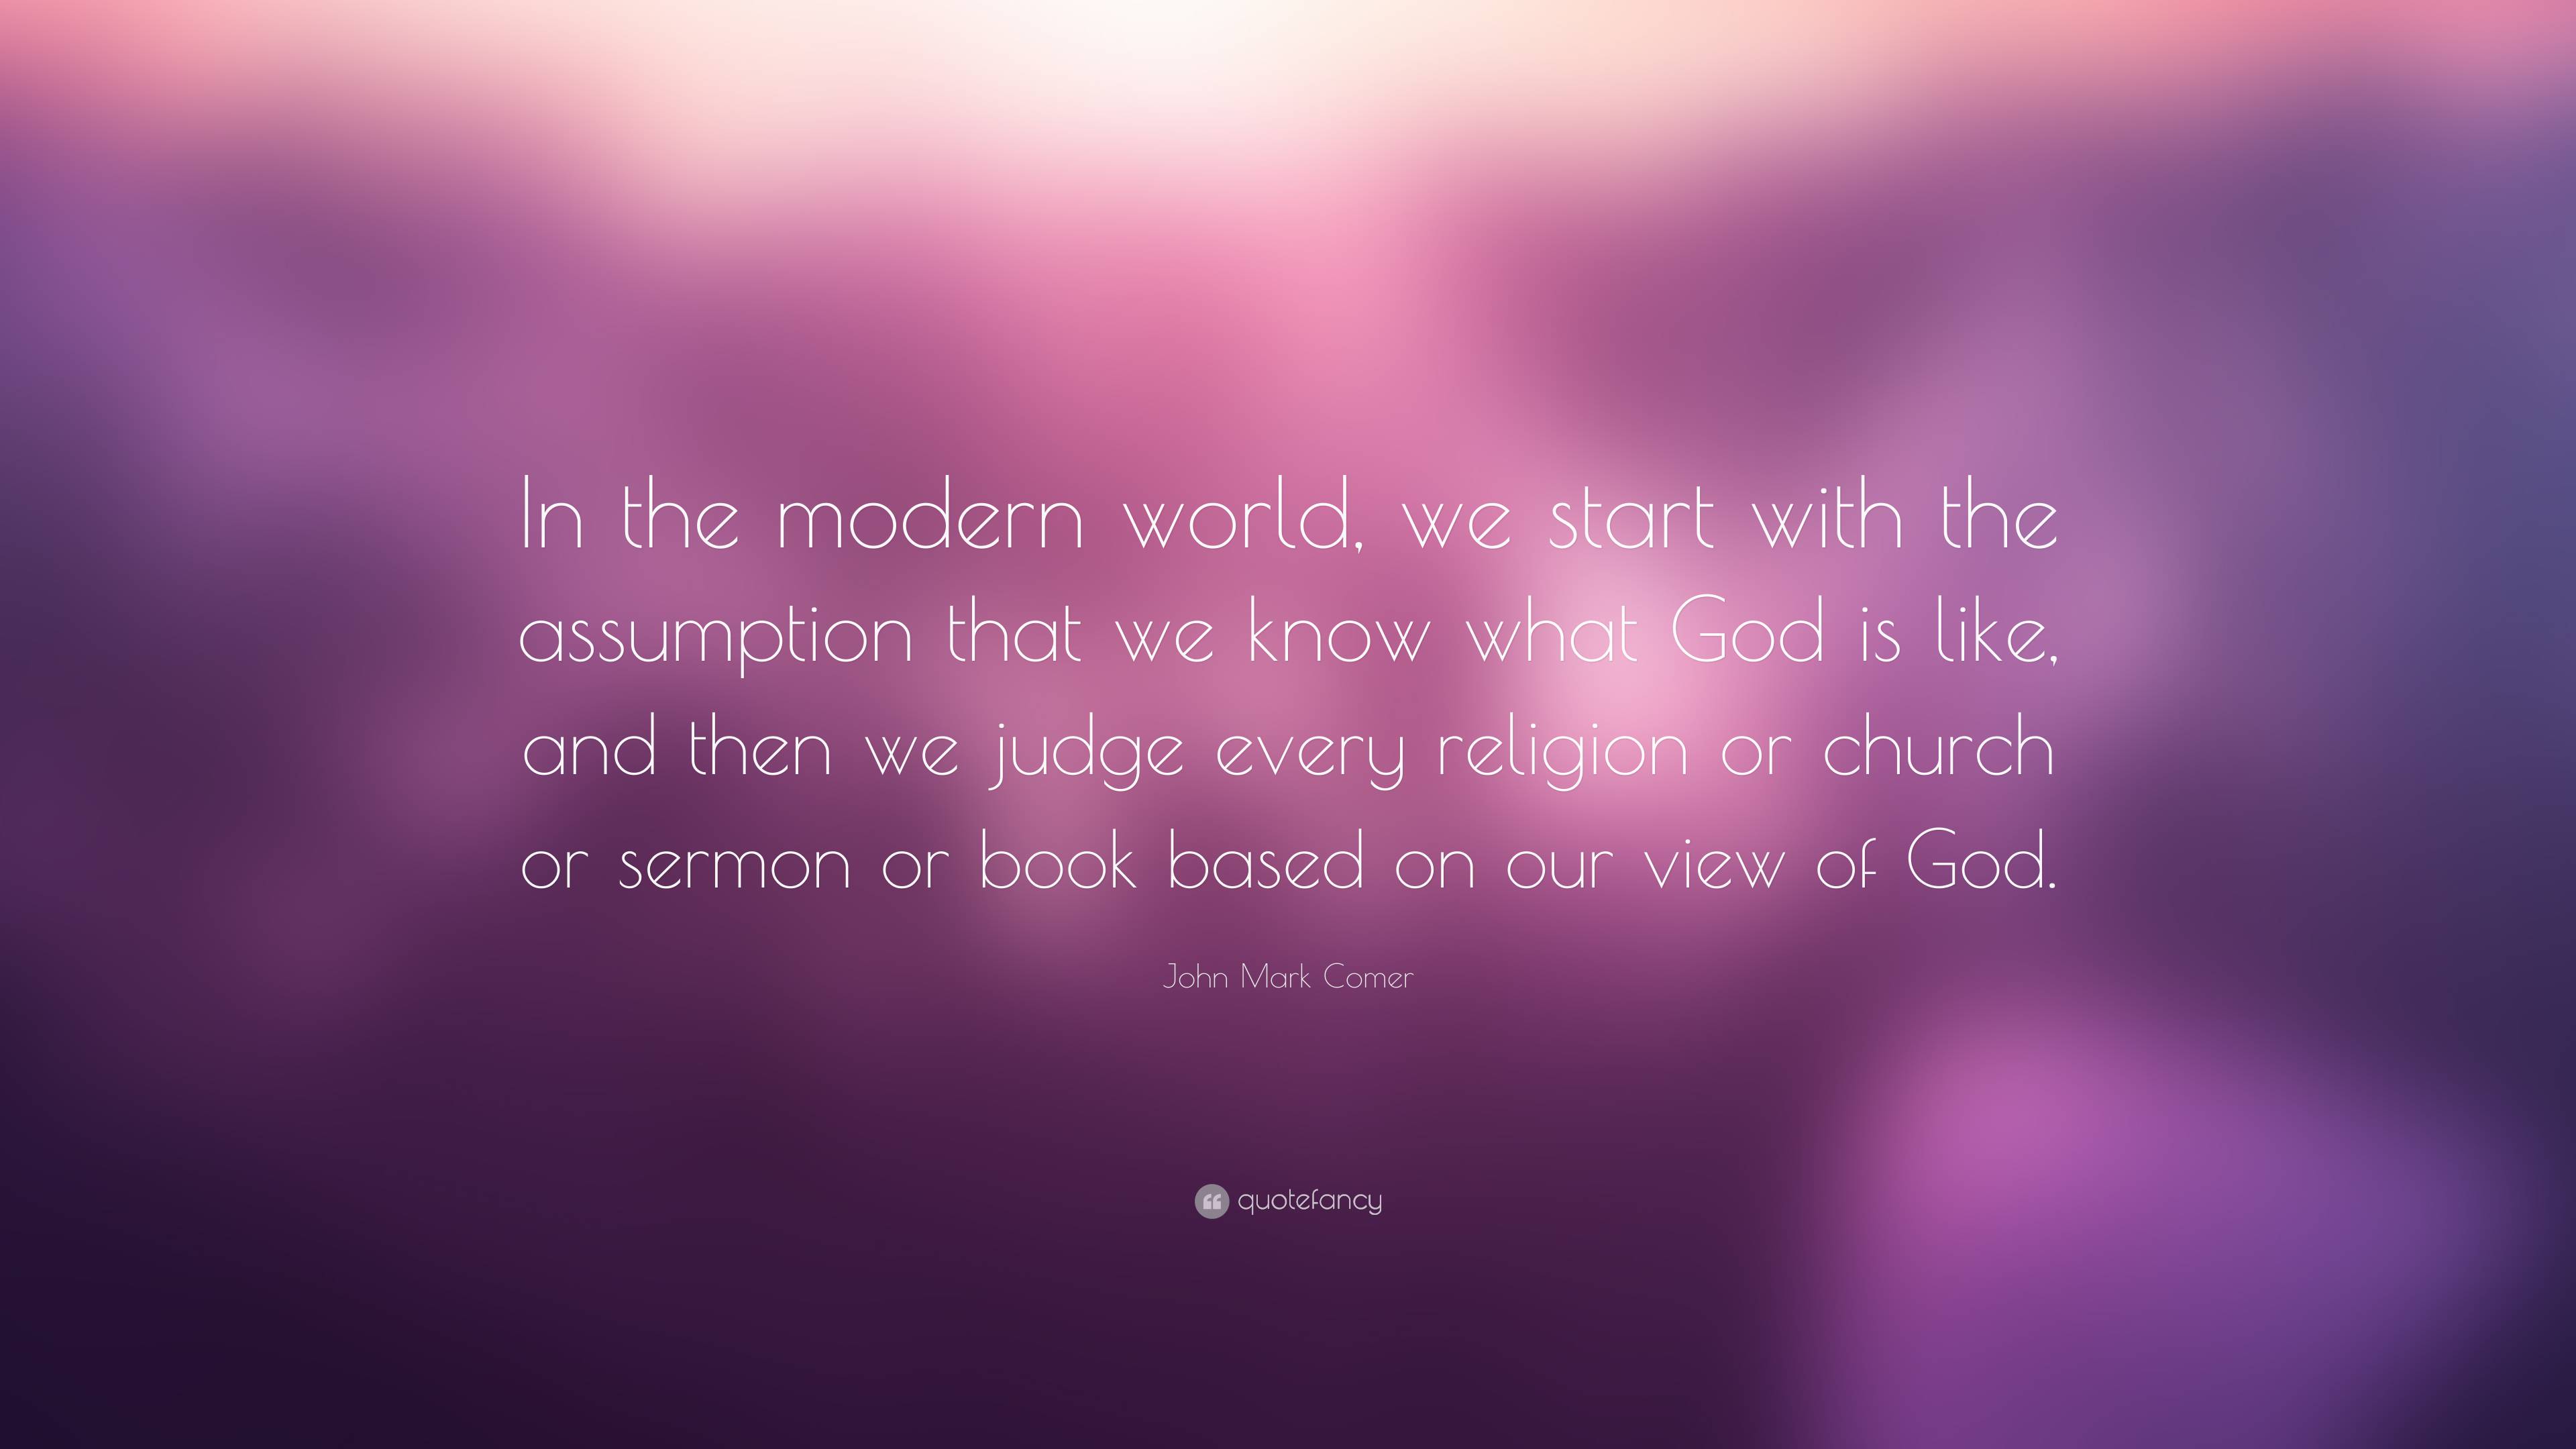 John Mark Comer Quote: “In the modern world, we start with the ...